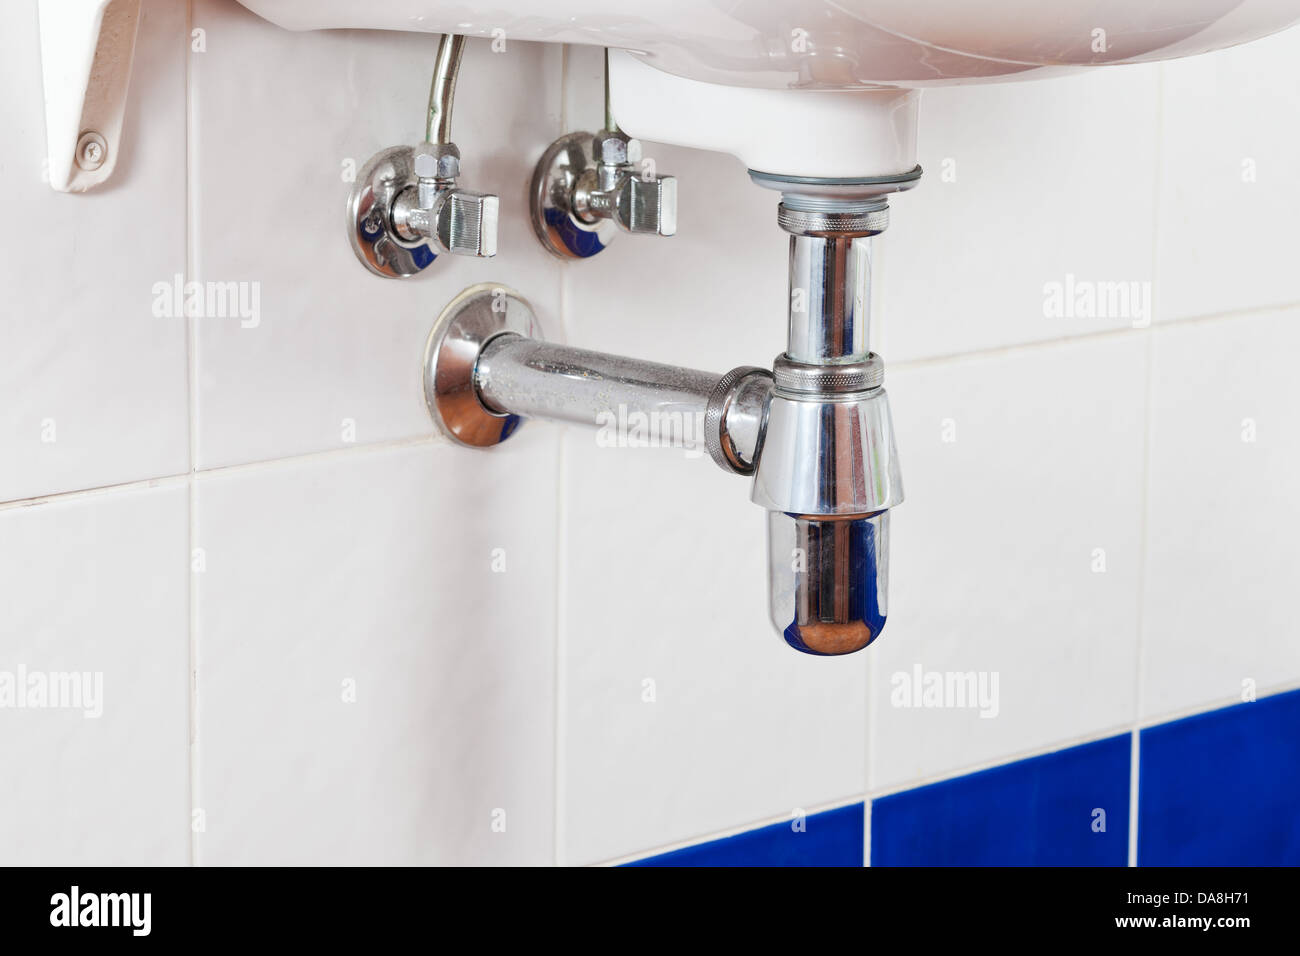 metal sink siphon and drain closed up Stock Photo